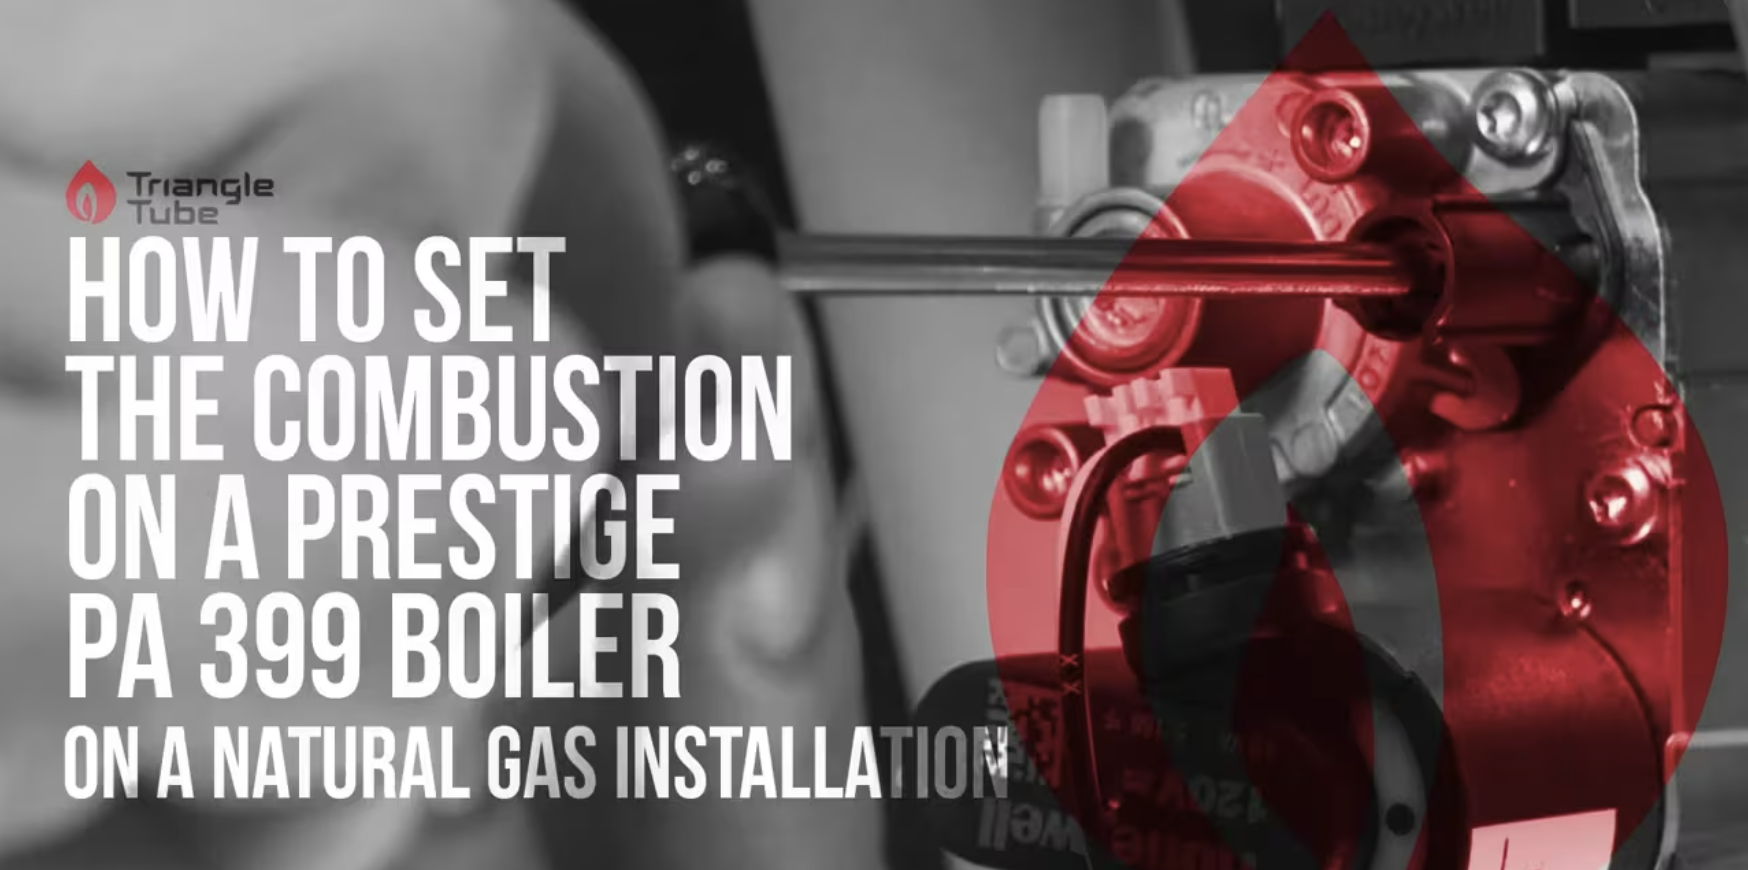 How To: Set Combustion Prestige PA399, PA299